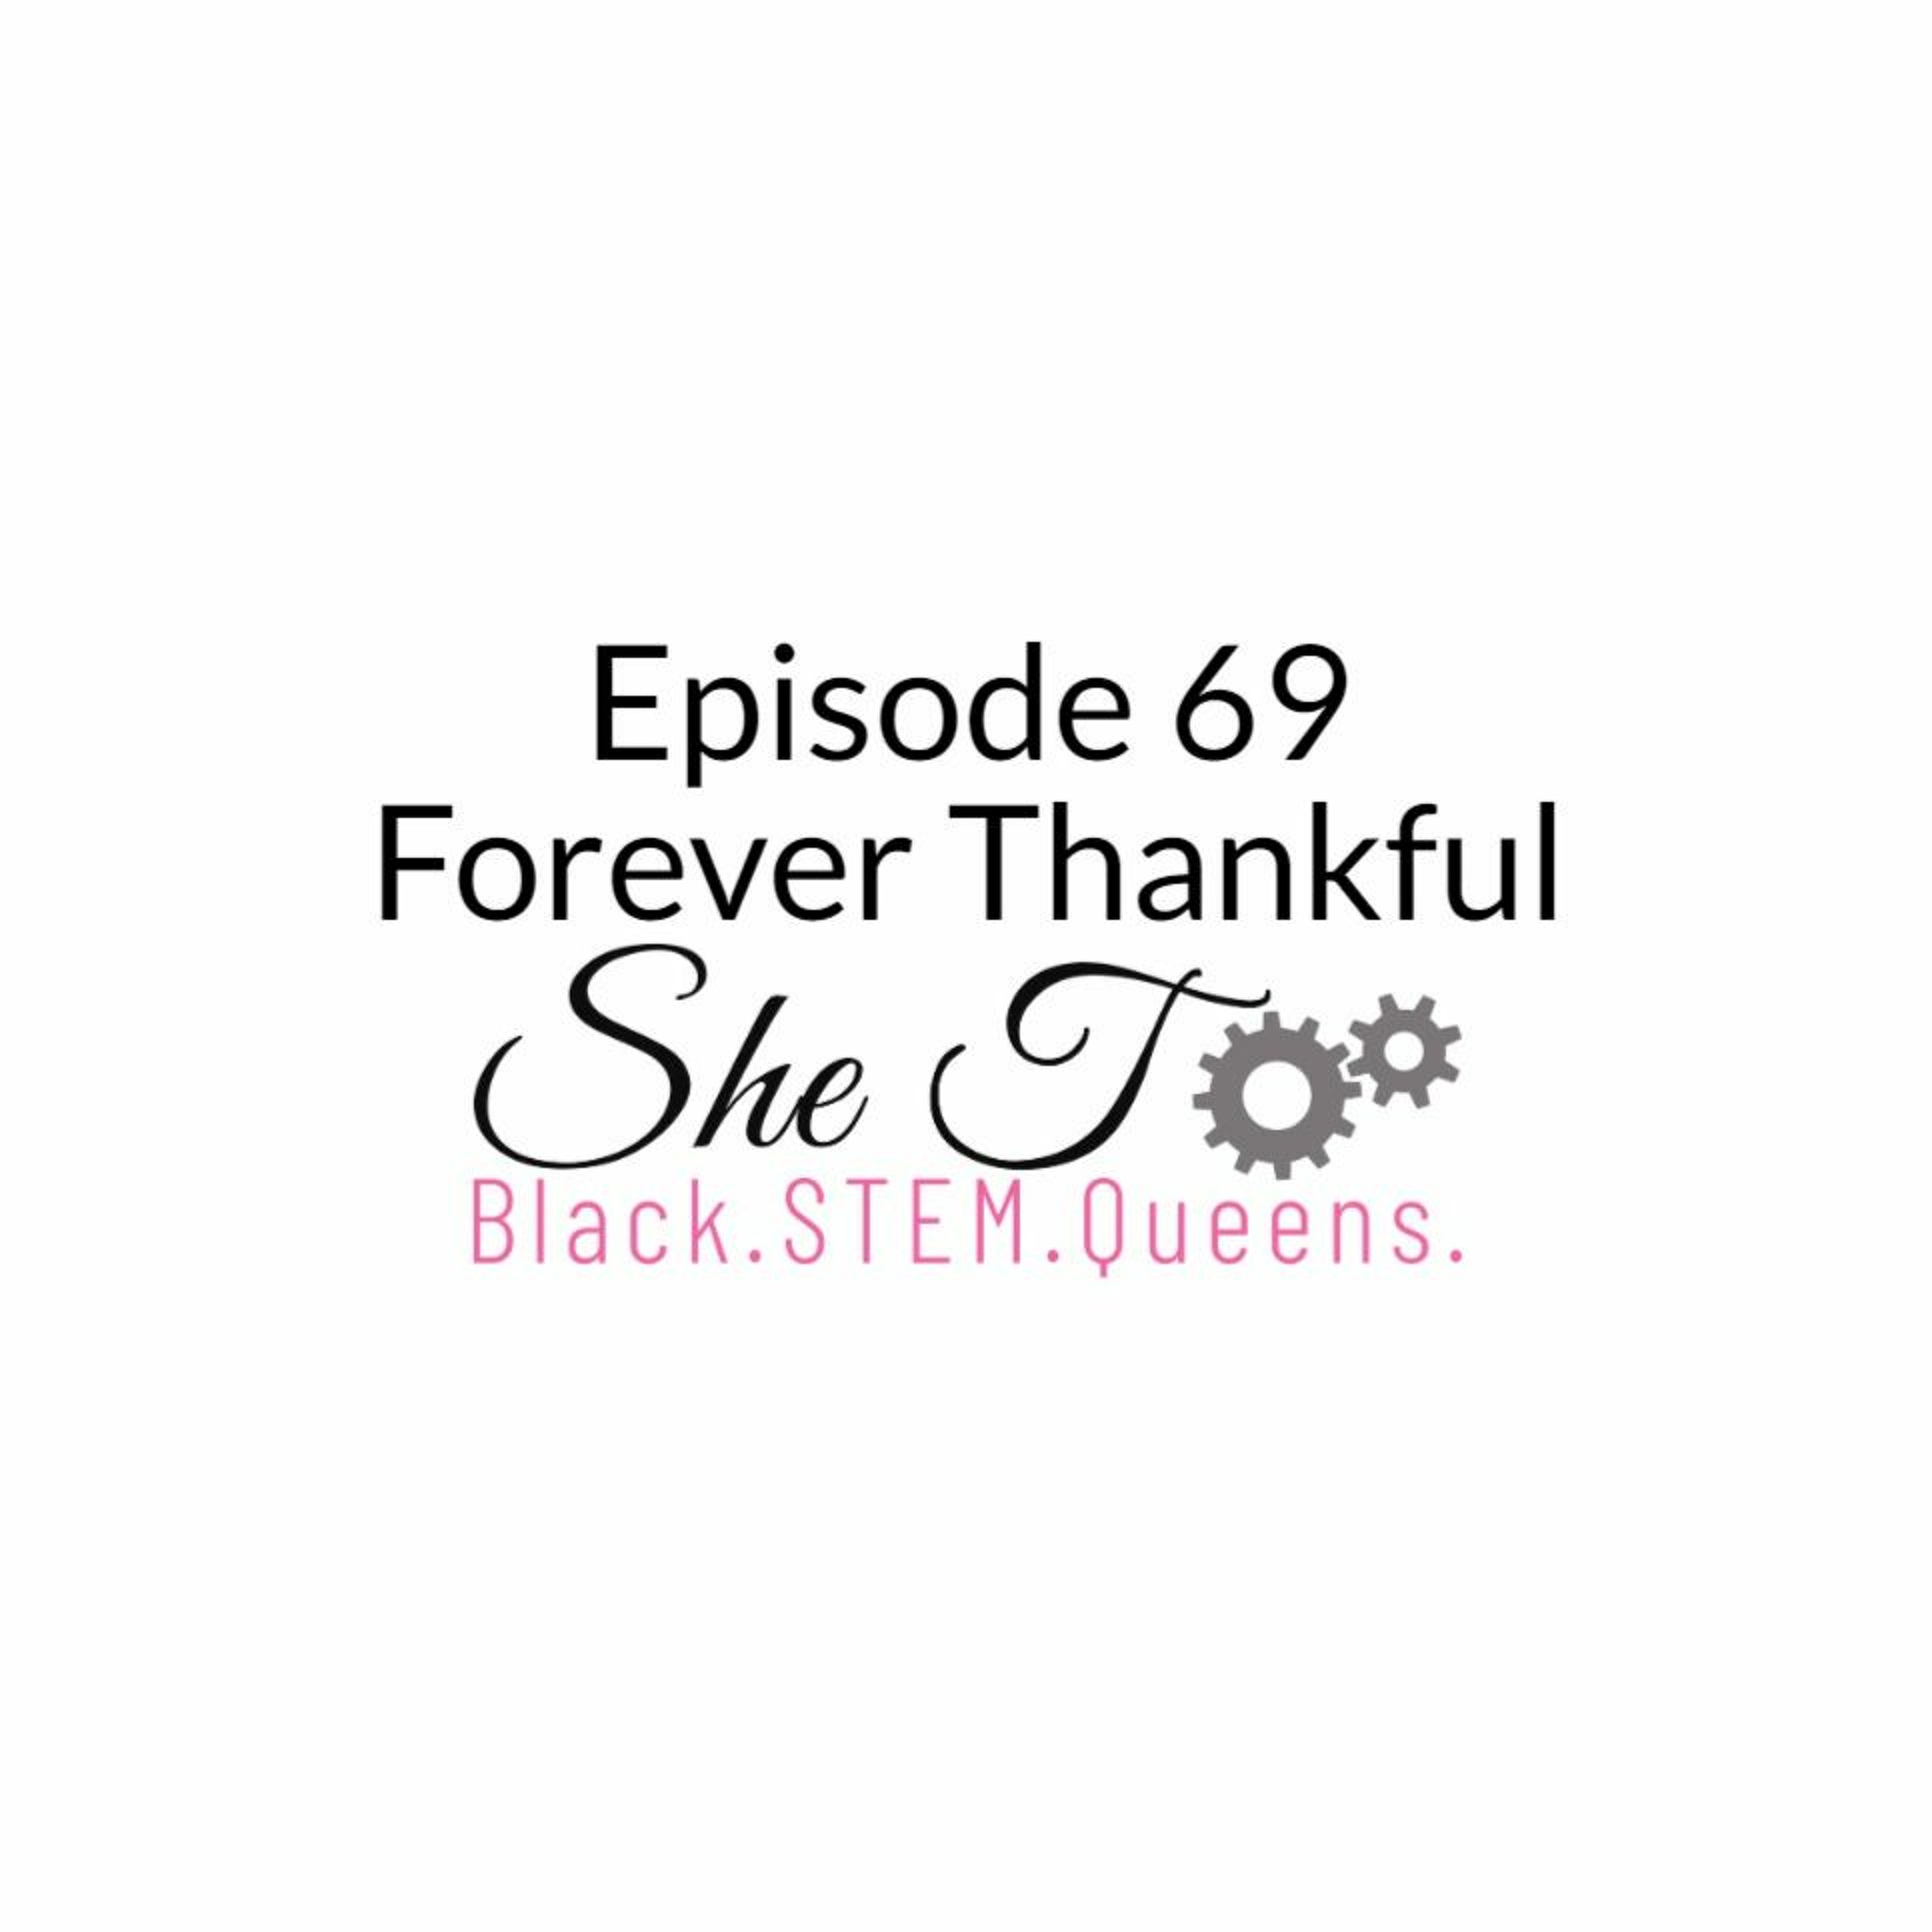 Episode 69: Forever Thankful